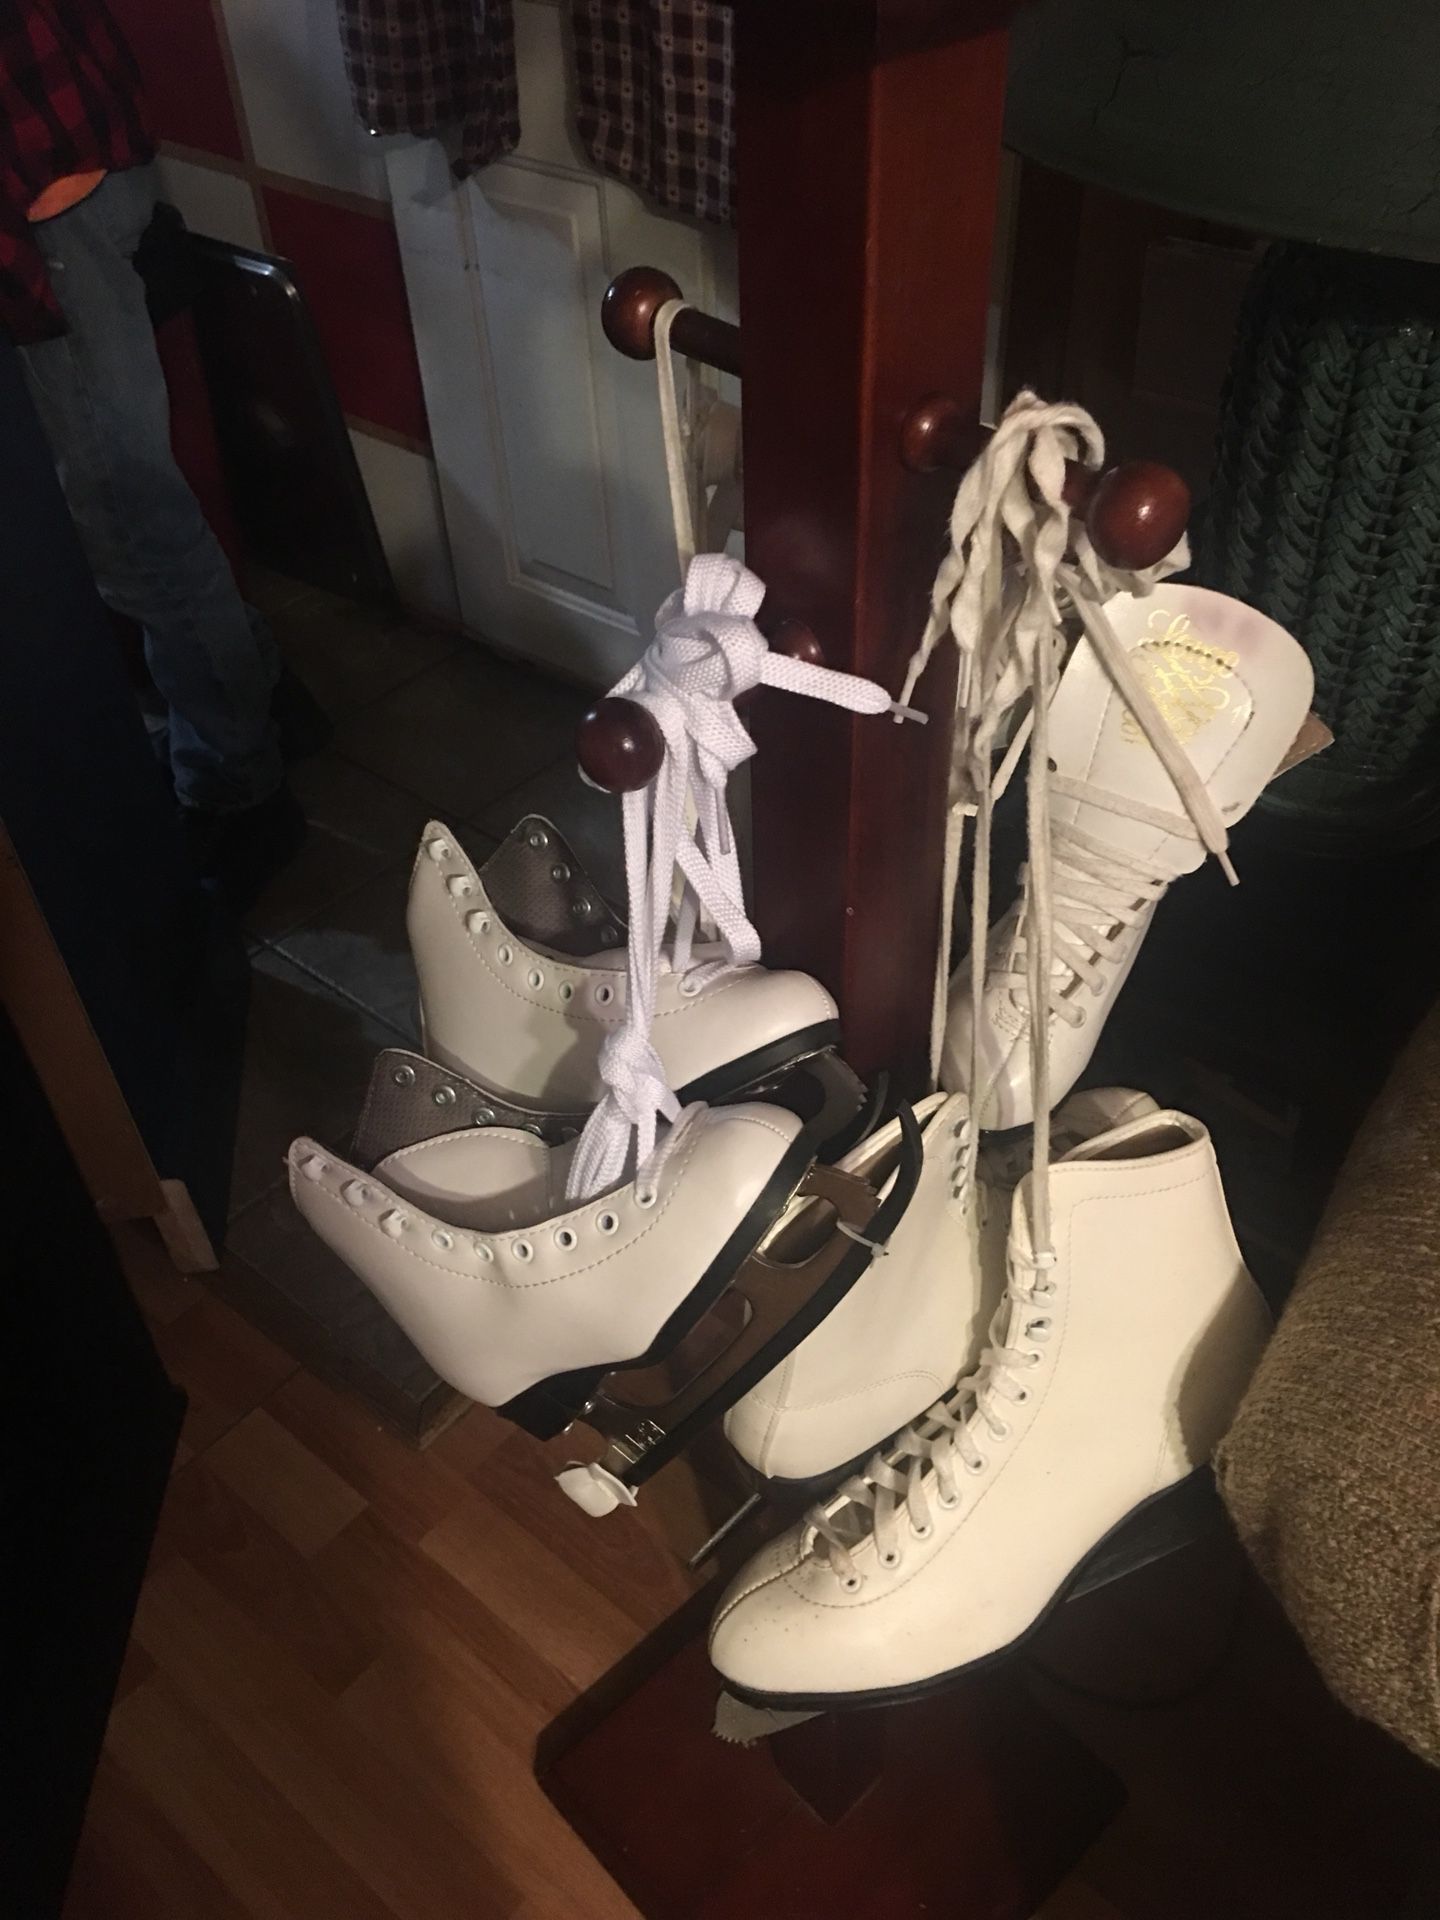 Several pairs of ice skates Nice for decorating sleds our Christmas $20 a pair